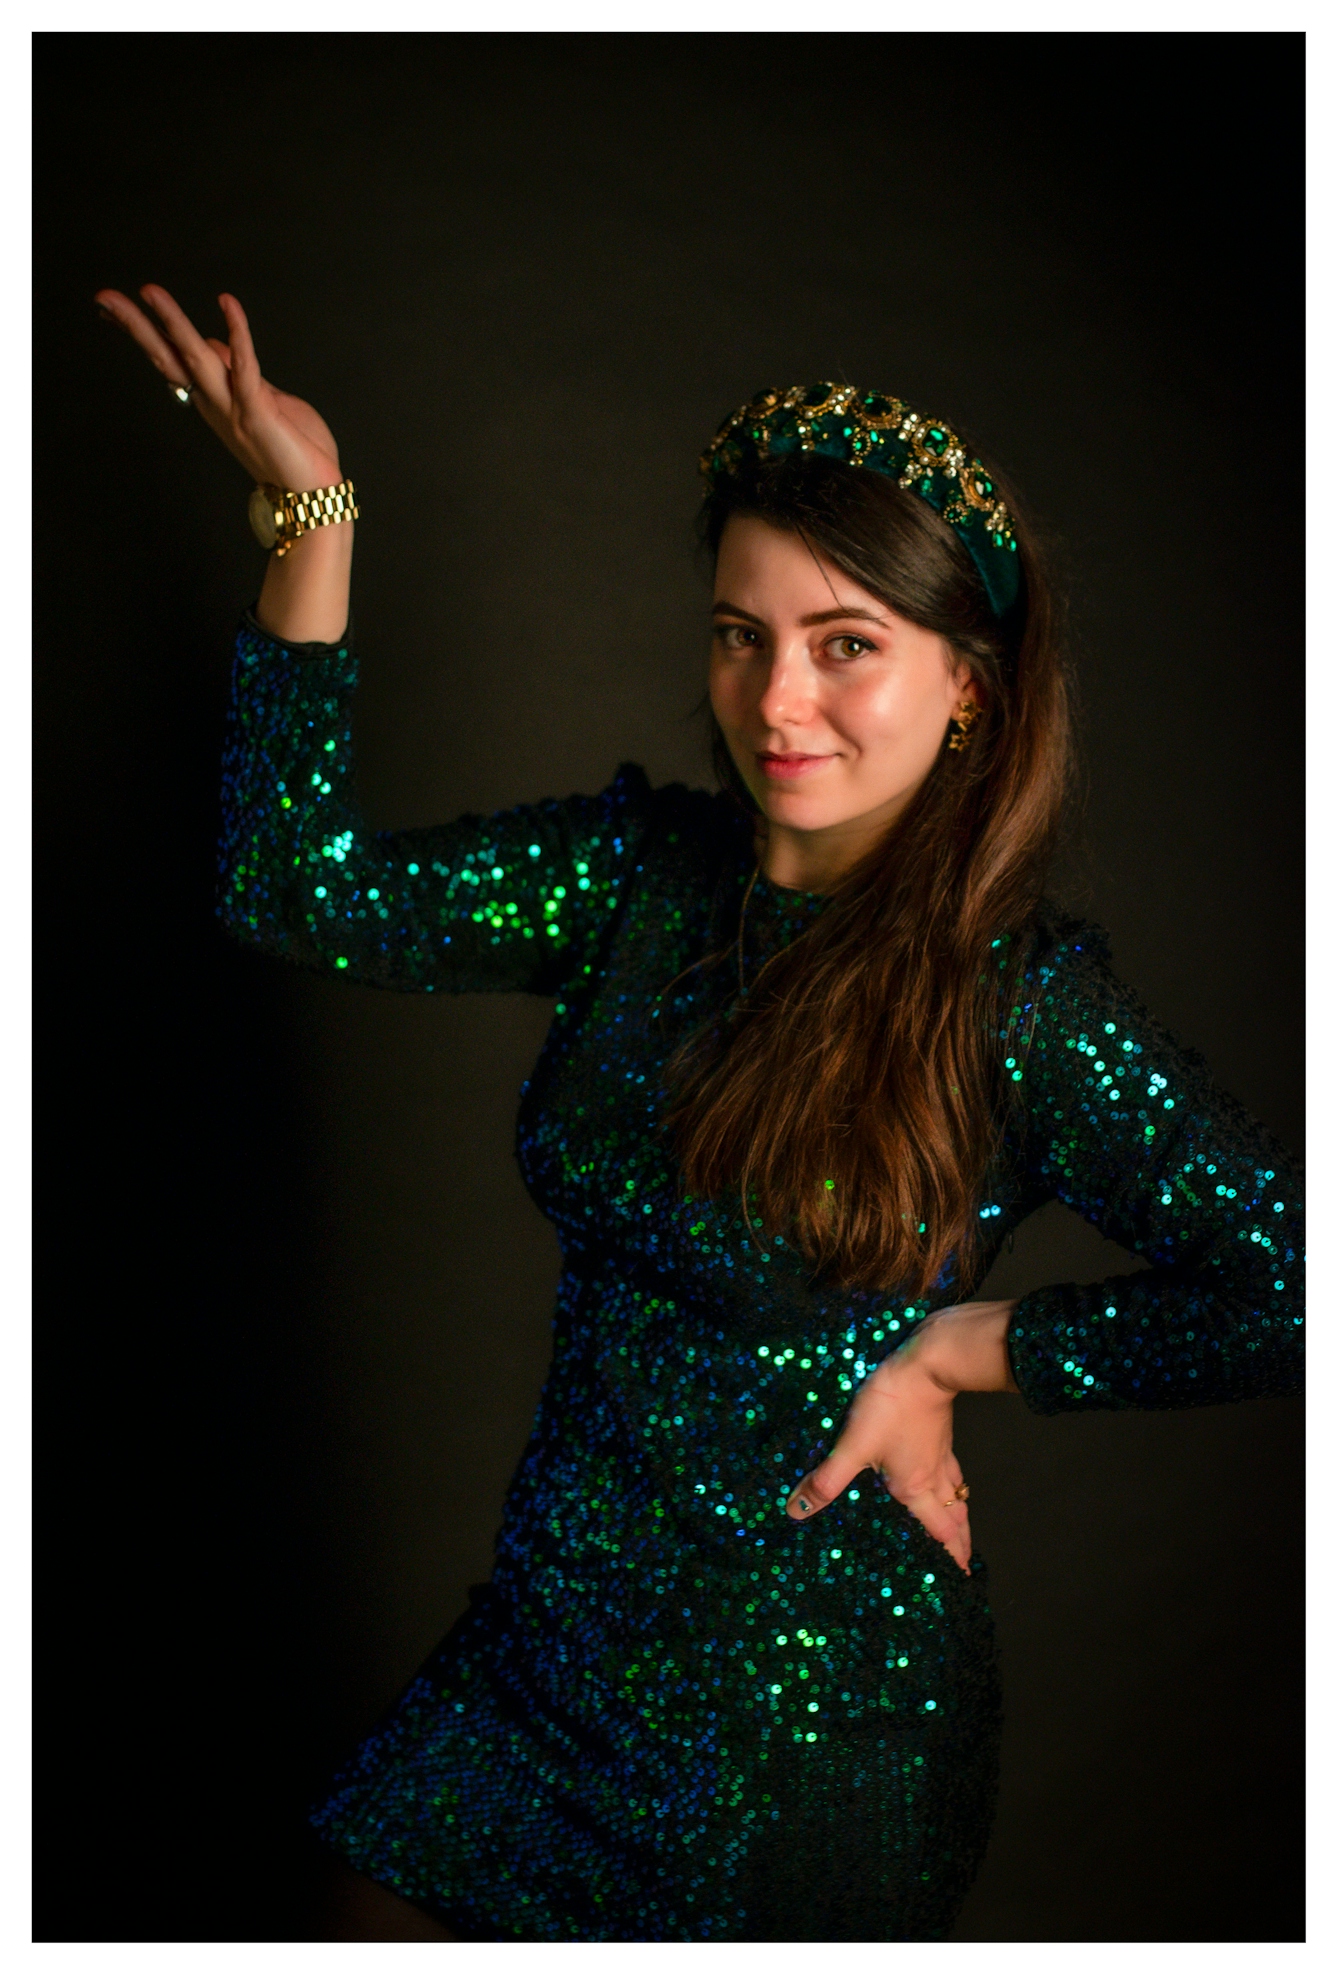 Photographic portrait of a white woman wearing a sequinned green and blue dress with matching hairband, stood against a black background. She is looking to camera with an quiet smile, one hand on her hip, the other raised in the air, palm open upwards.